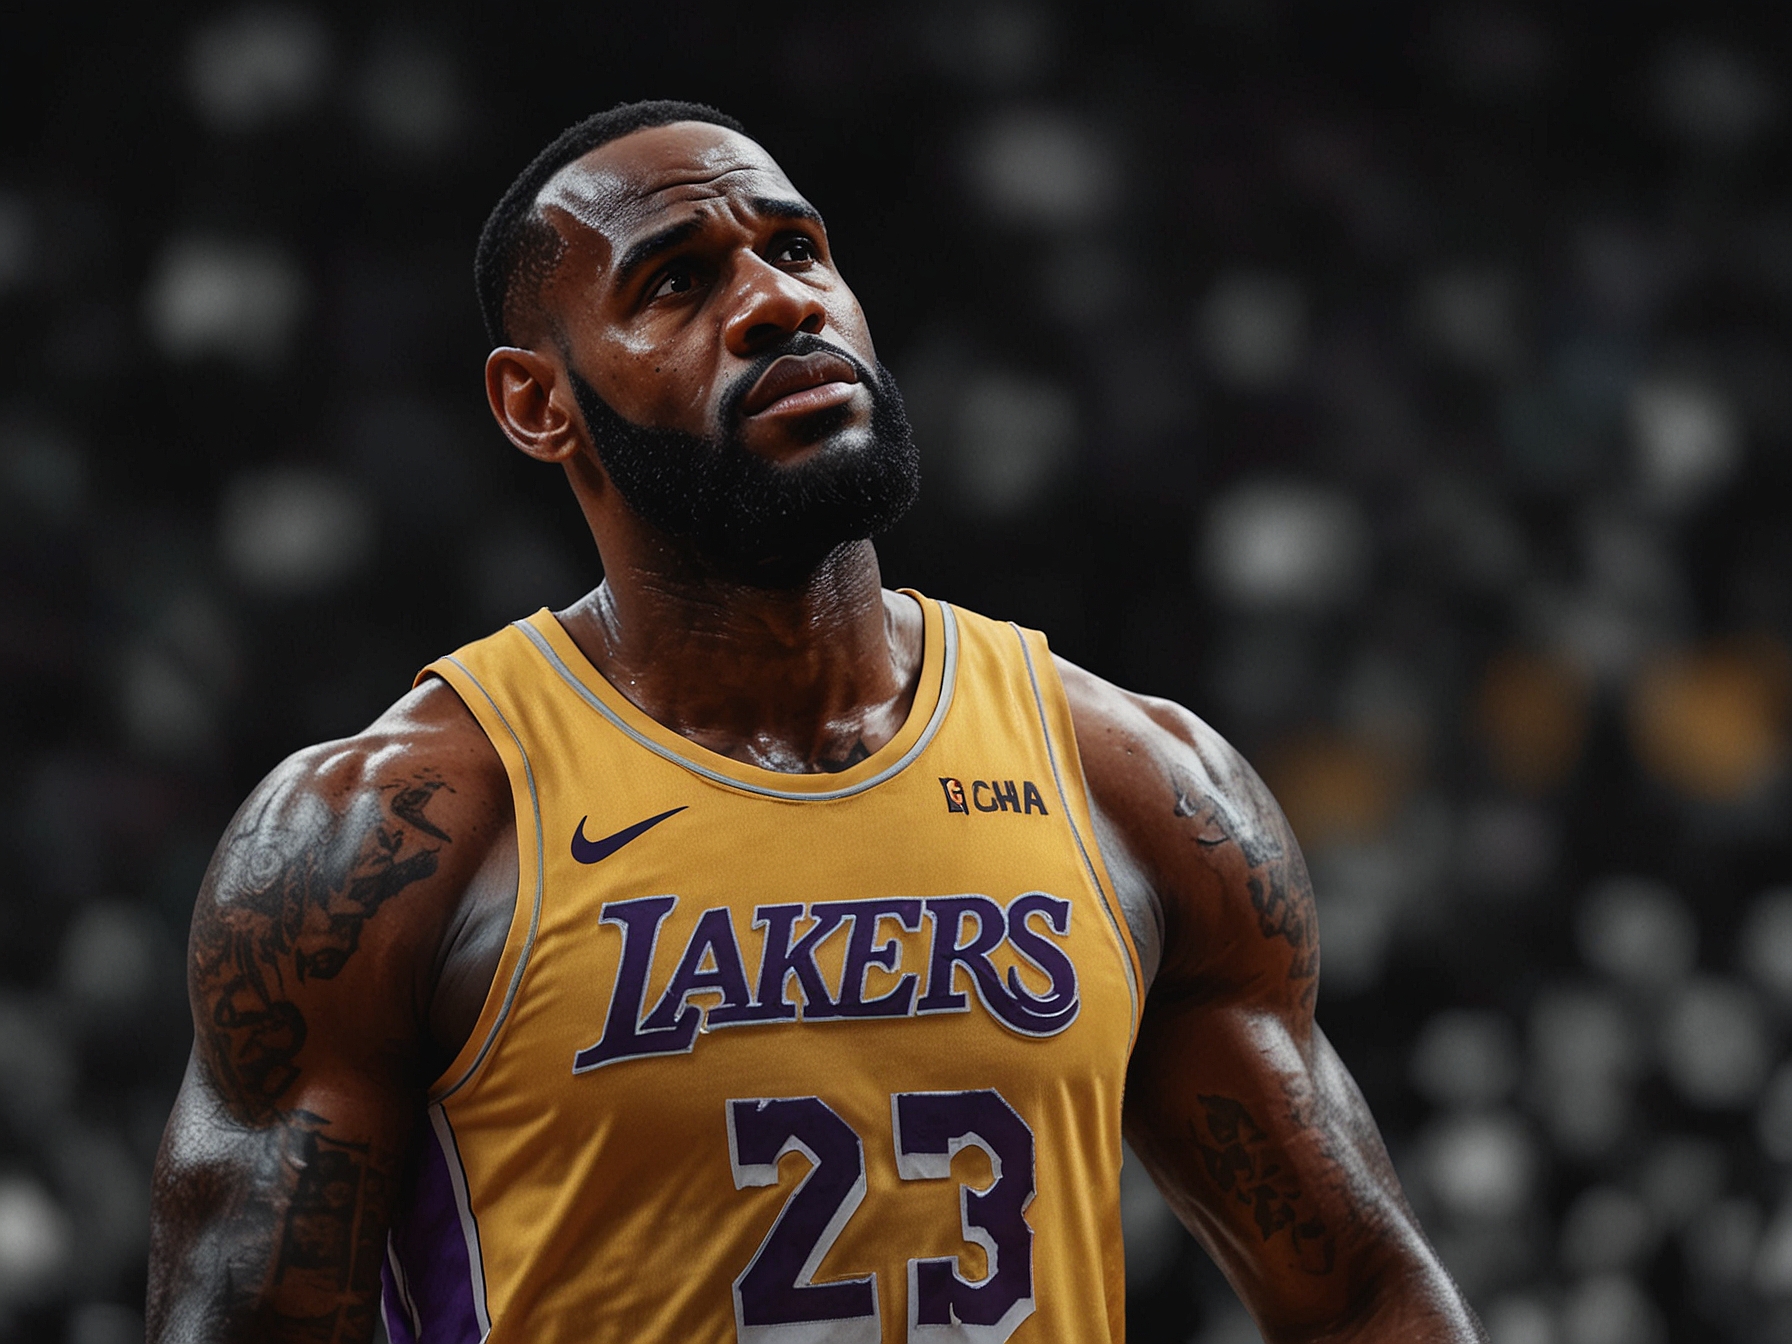 LeBron James, in his Lakers uniform, signals to the crowd at a home game, symbolizing his crucial role and the potential impact of his departure on the team’s future.